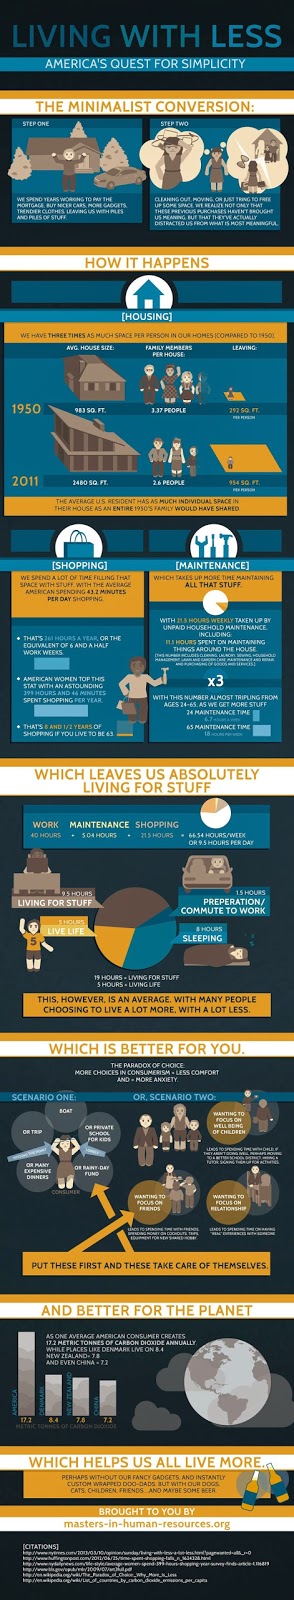 http://www.mnn.com/lifestyle/responsible-living/stories/why-we-need-to-live-with-less-infographic